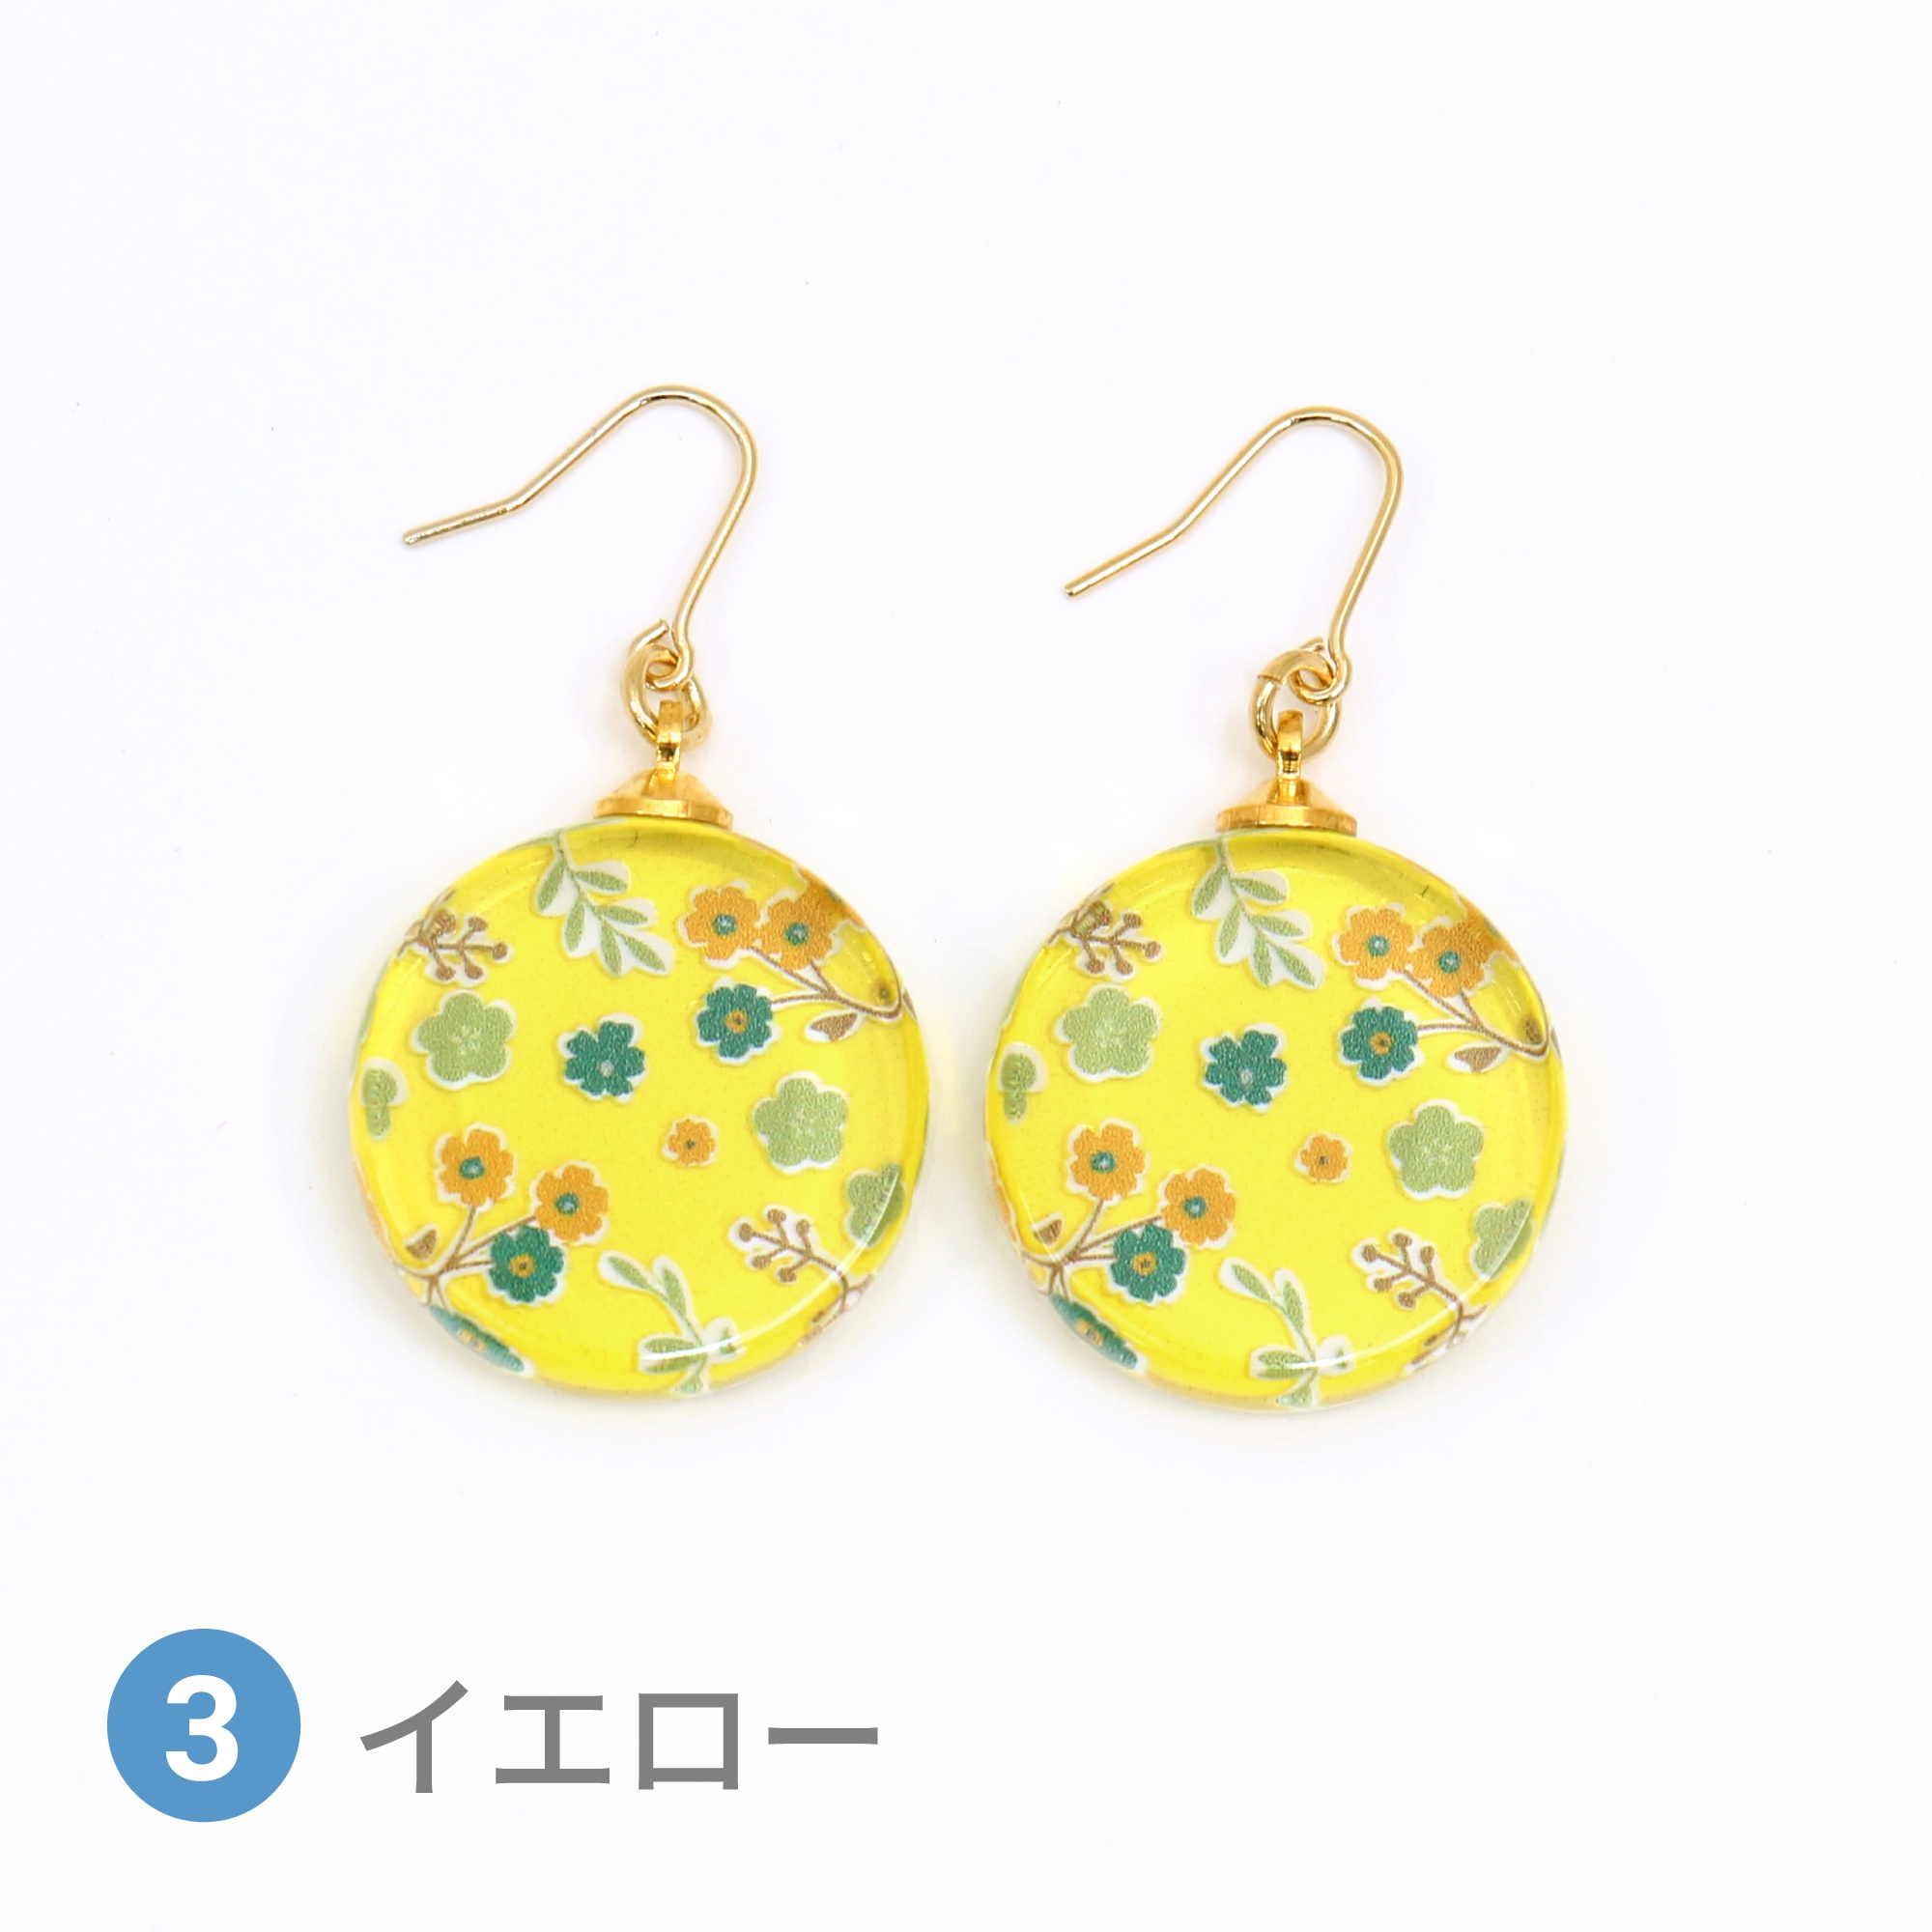 Glass accessories Pierced Earring FLORAL PATTERN yellow round shape